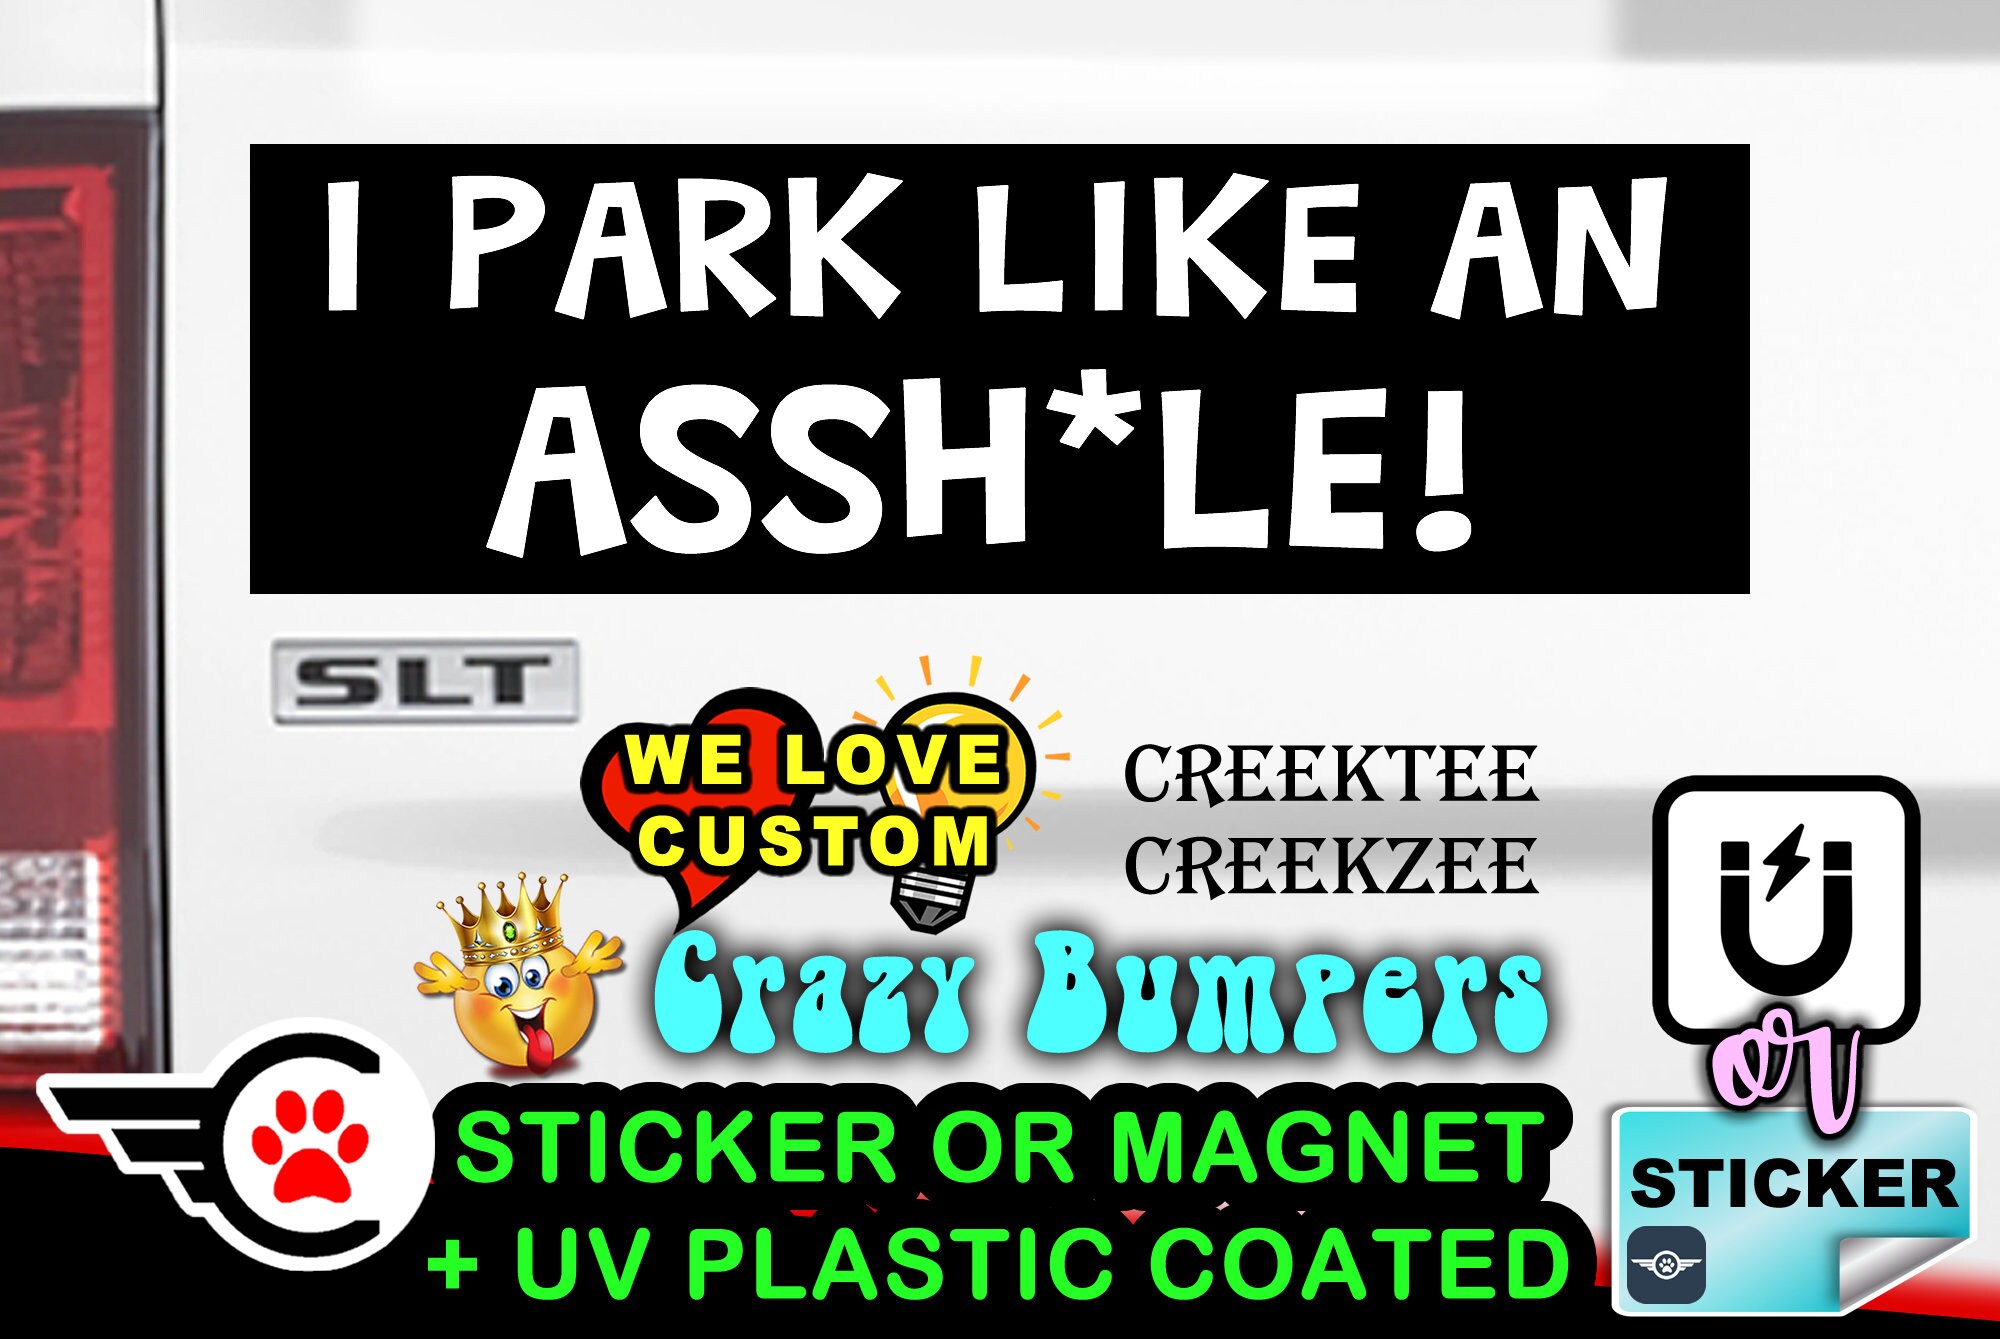 I Park Like An Assh*ole! ... Bumper Sticker or Magnet in new sizes, 4